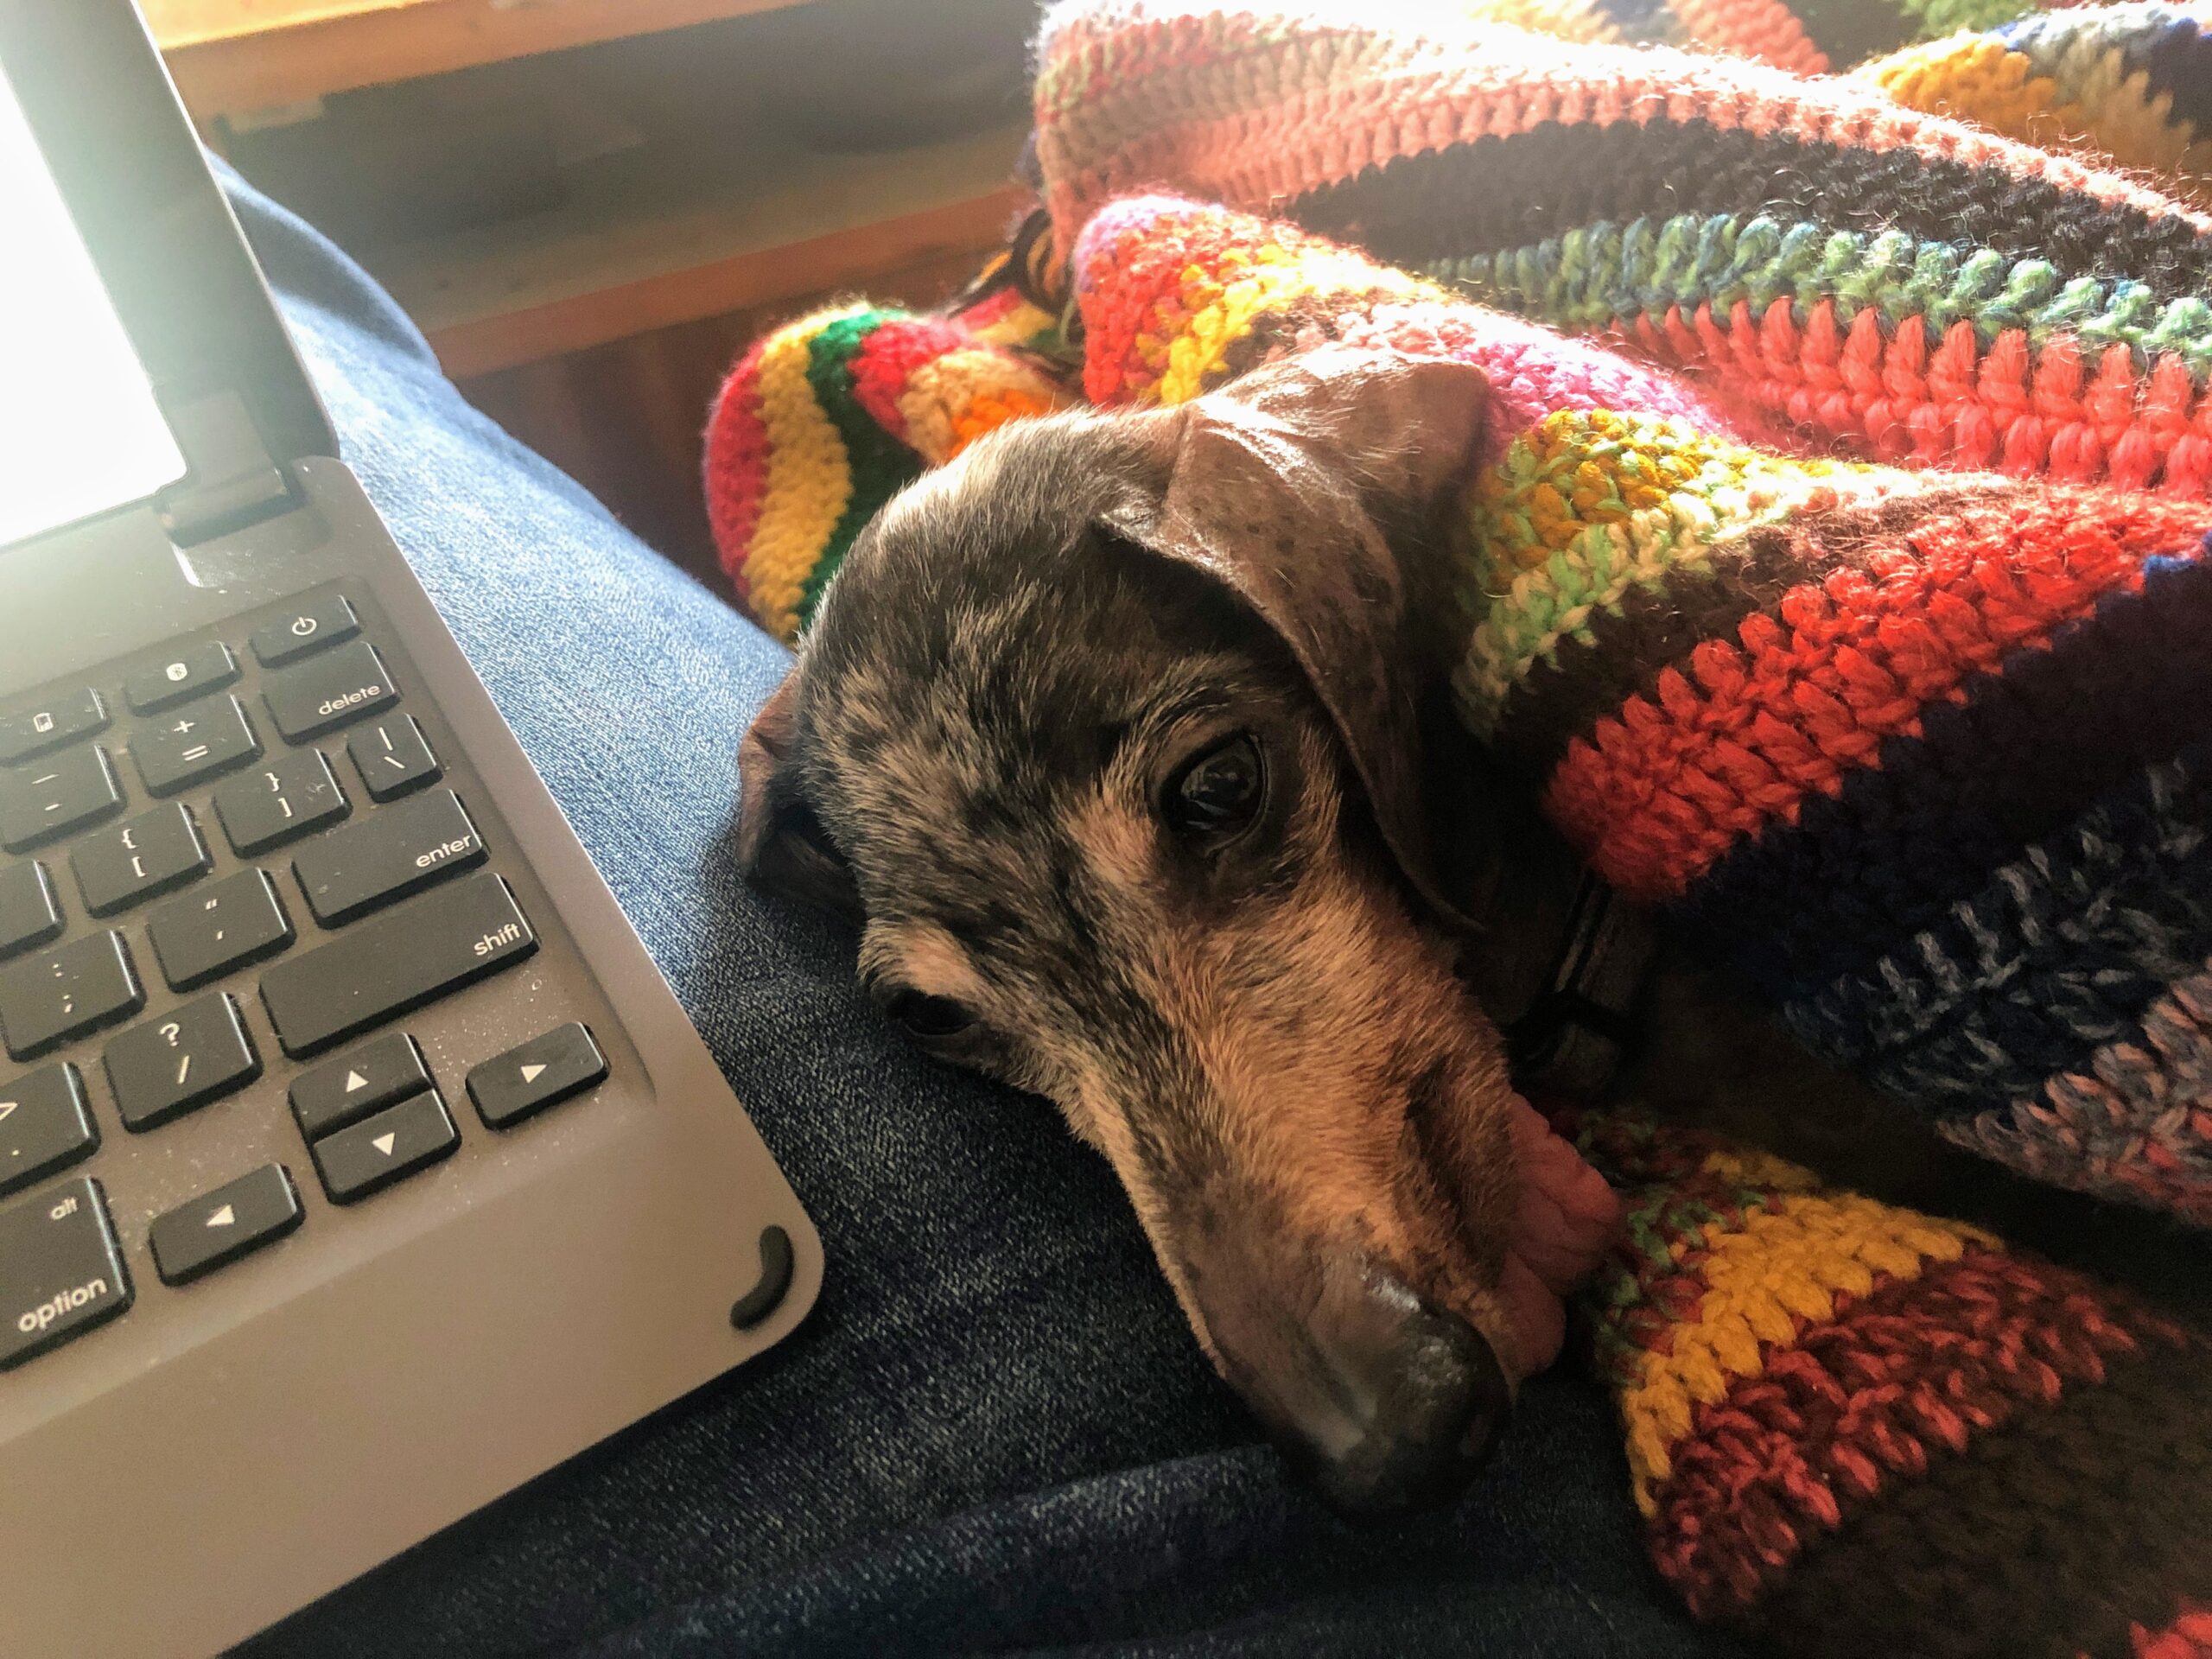 Dog resting head on human's lap, which also holds a laptop computer.